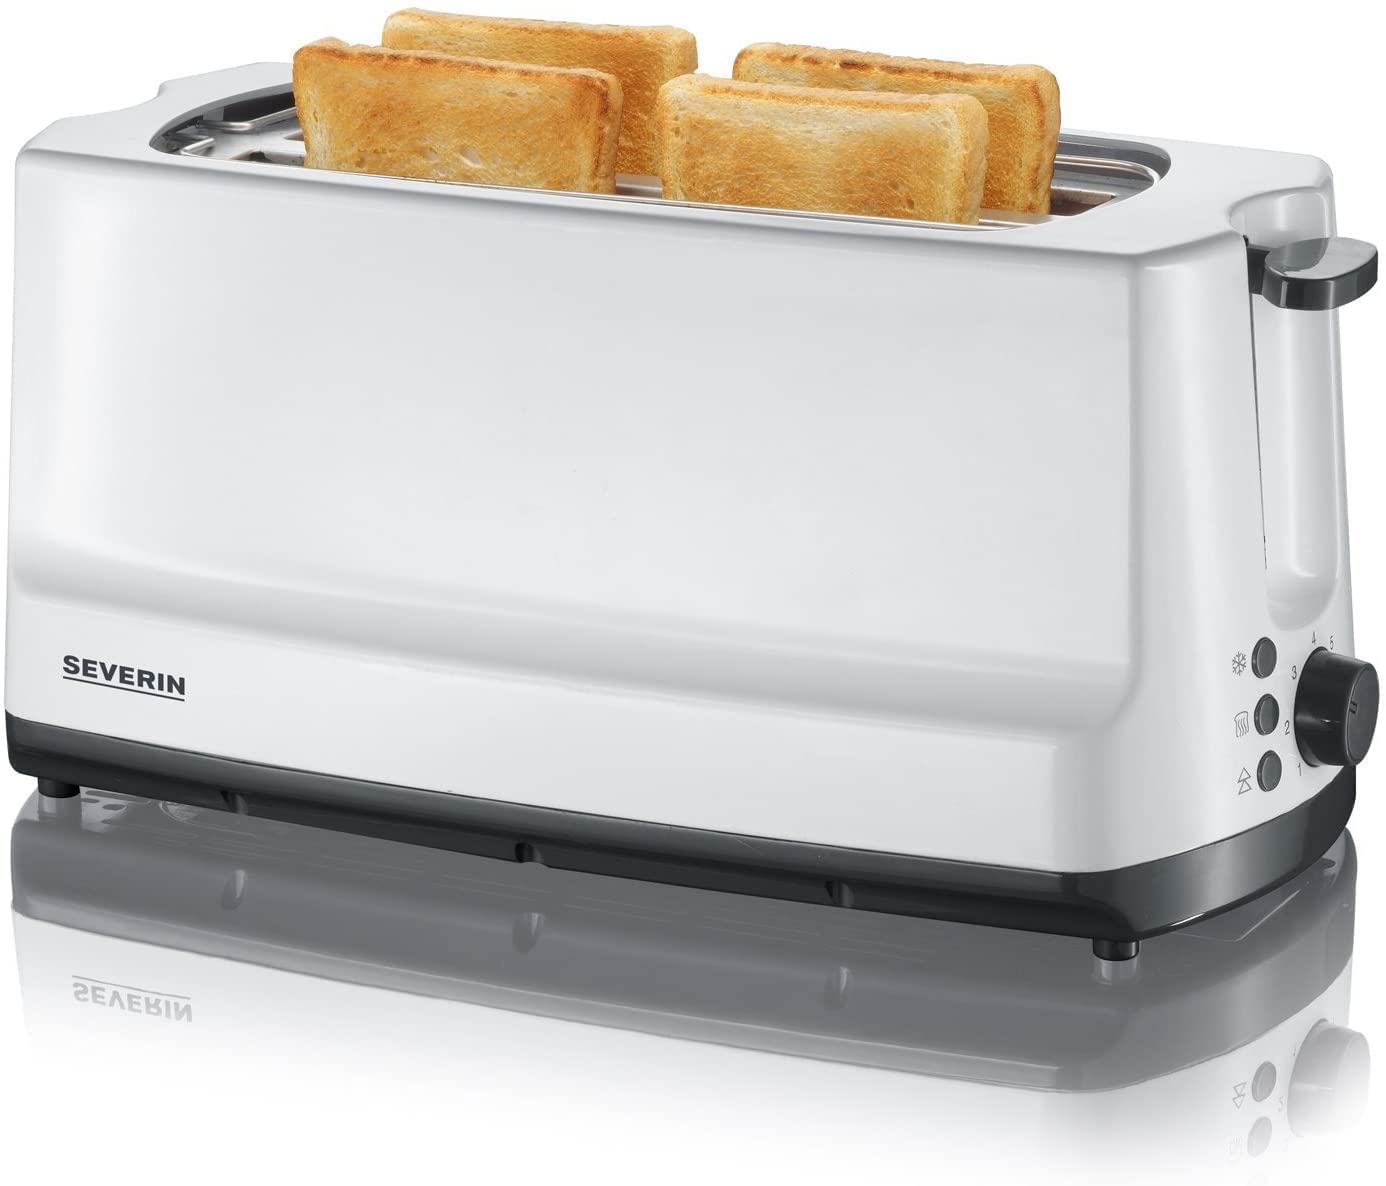 SEVERIN Automatic Toaster, 2 Long Slots, Up To 4 Bread Slices, 1400 W, AT 2234, White/Grey